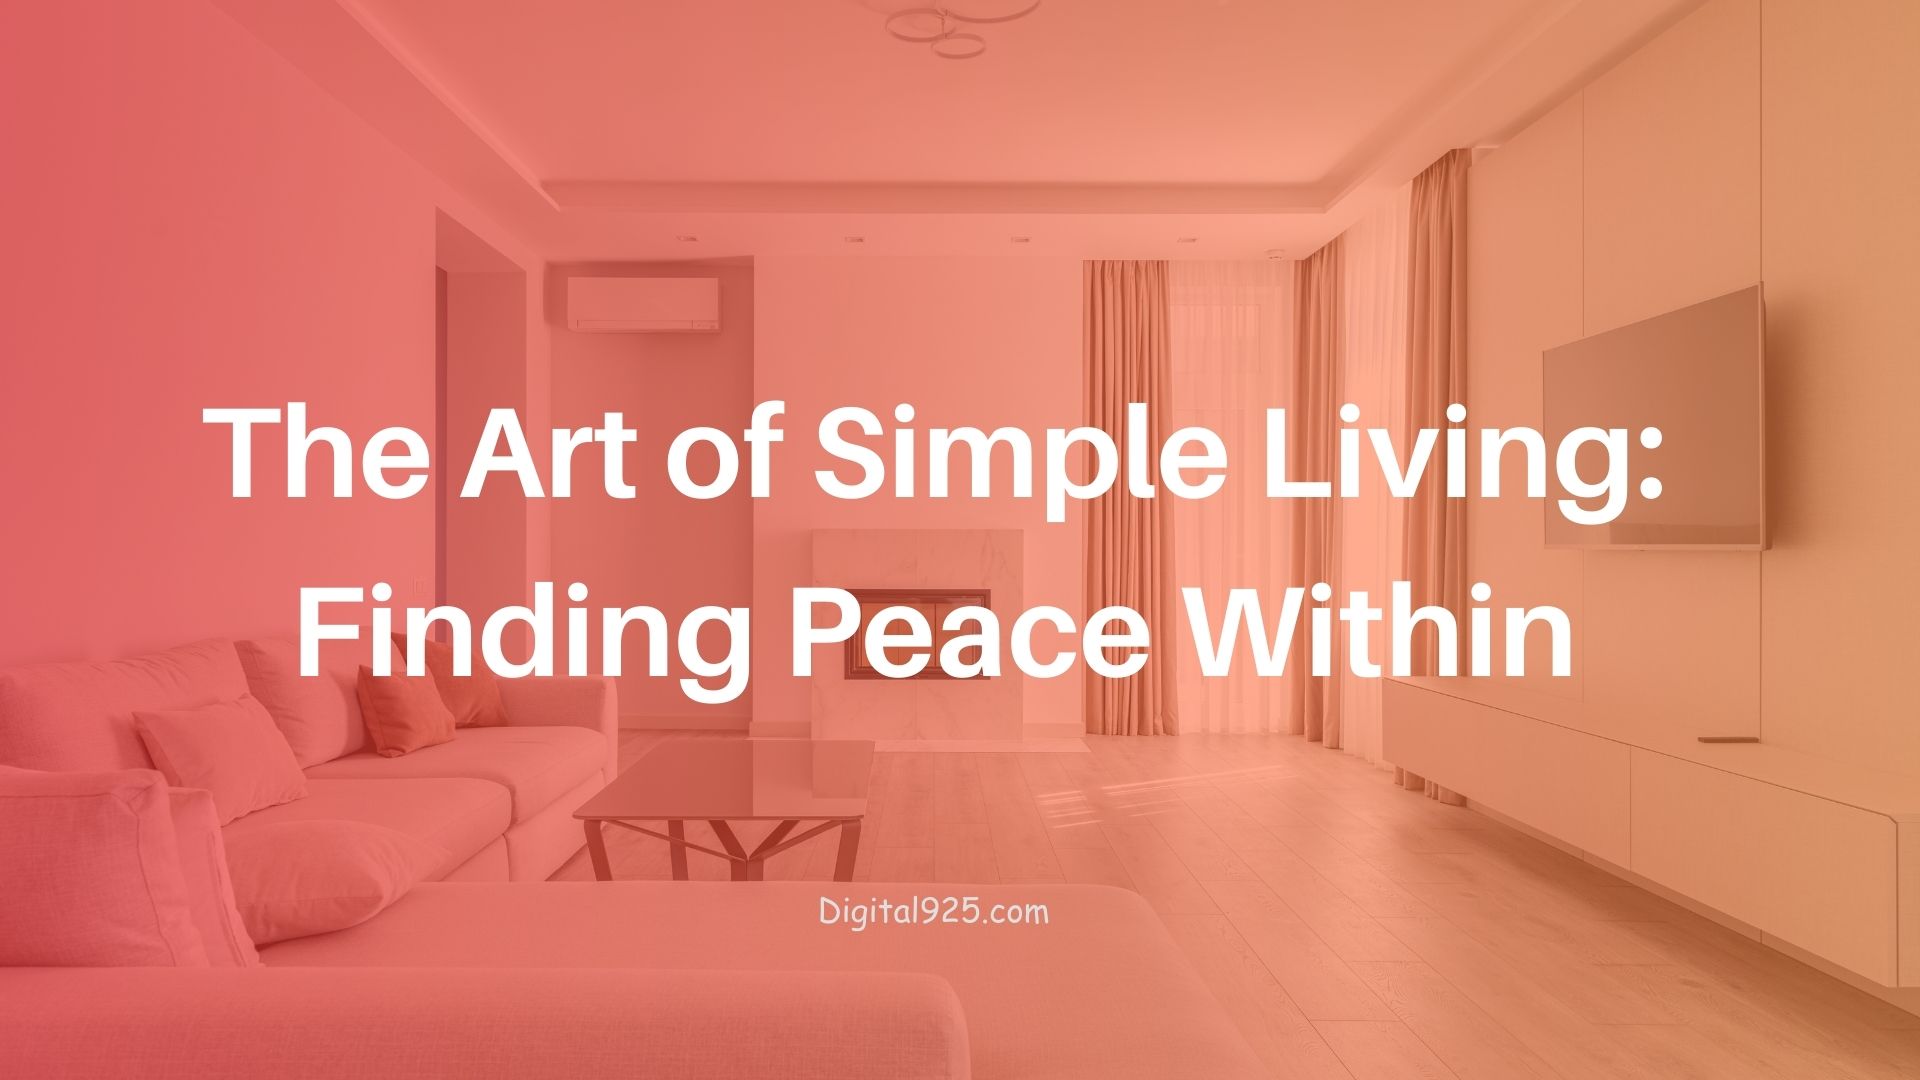 The Art of Simple Living: Finding Peace Within